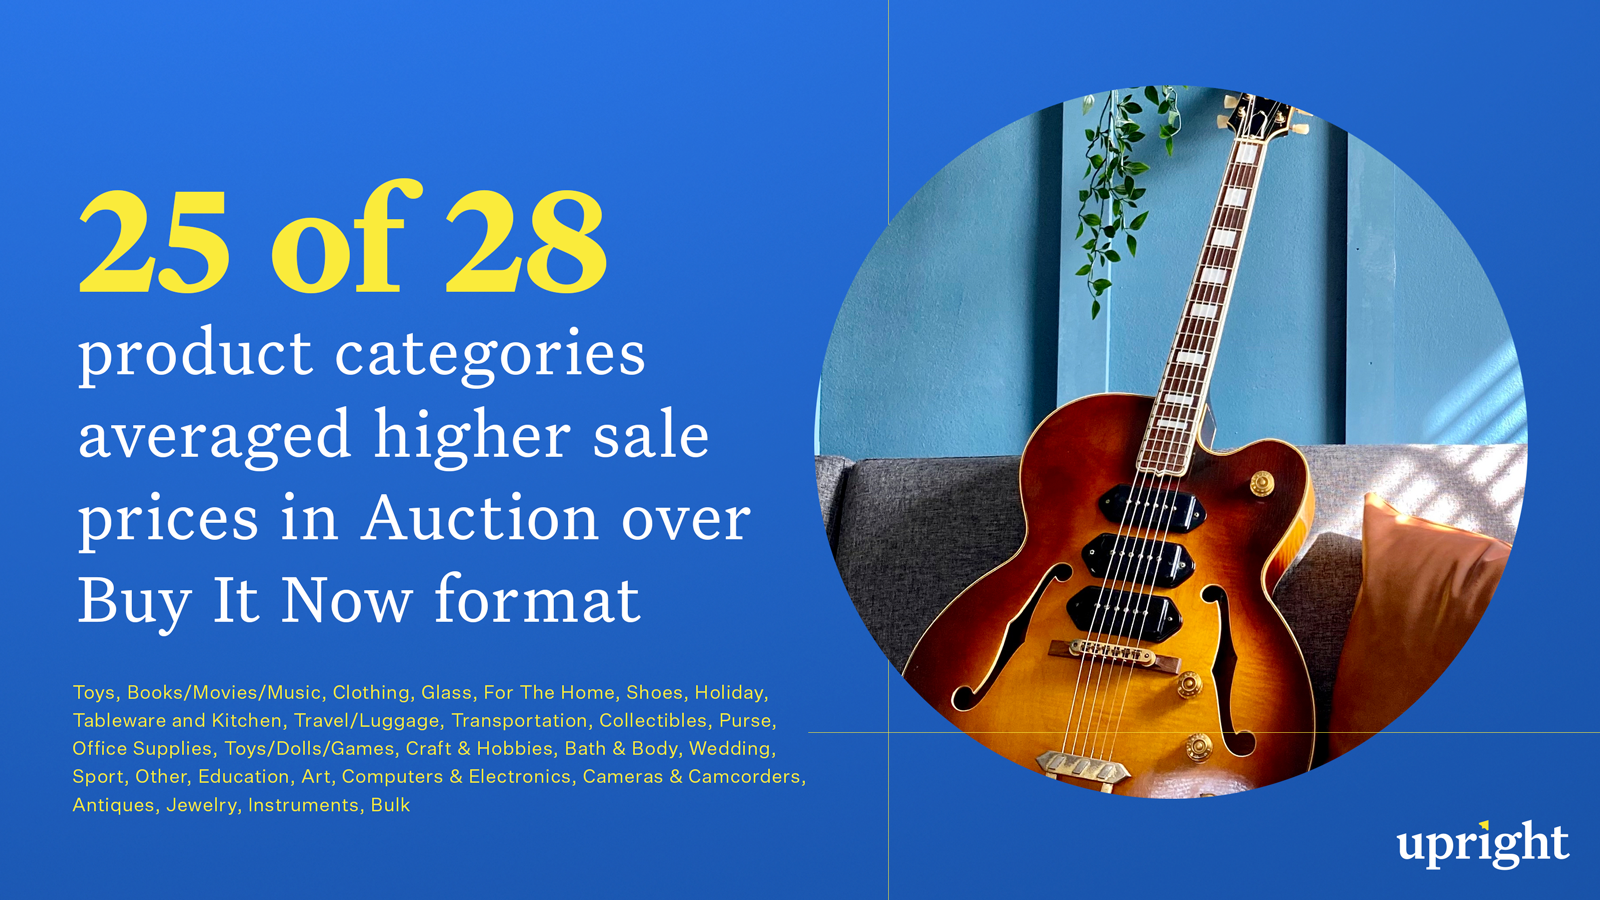 25 of 28 categories average higher sales in auction